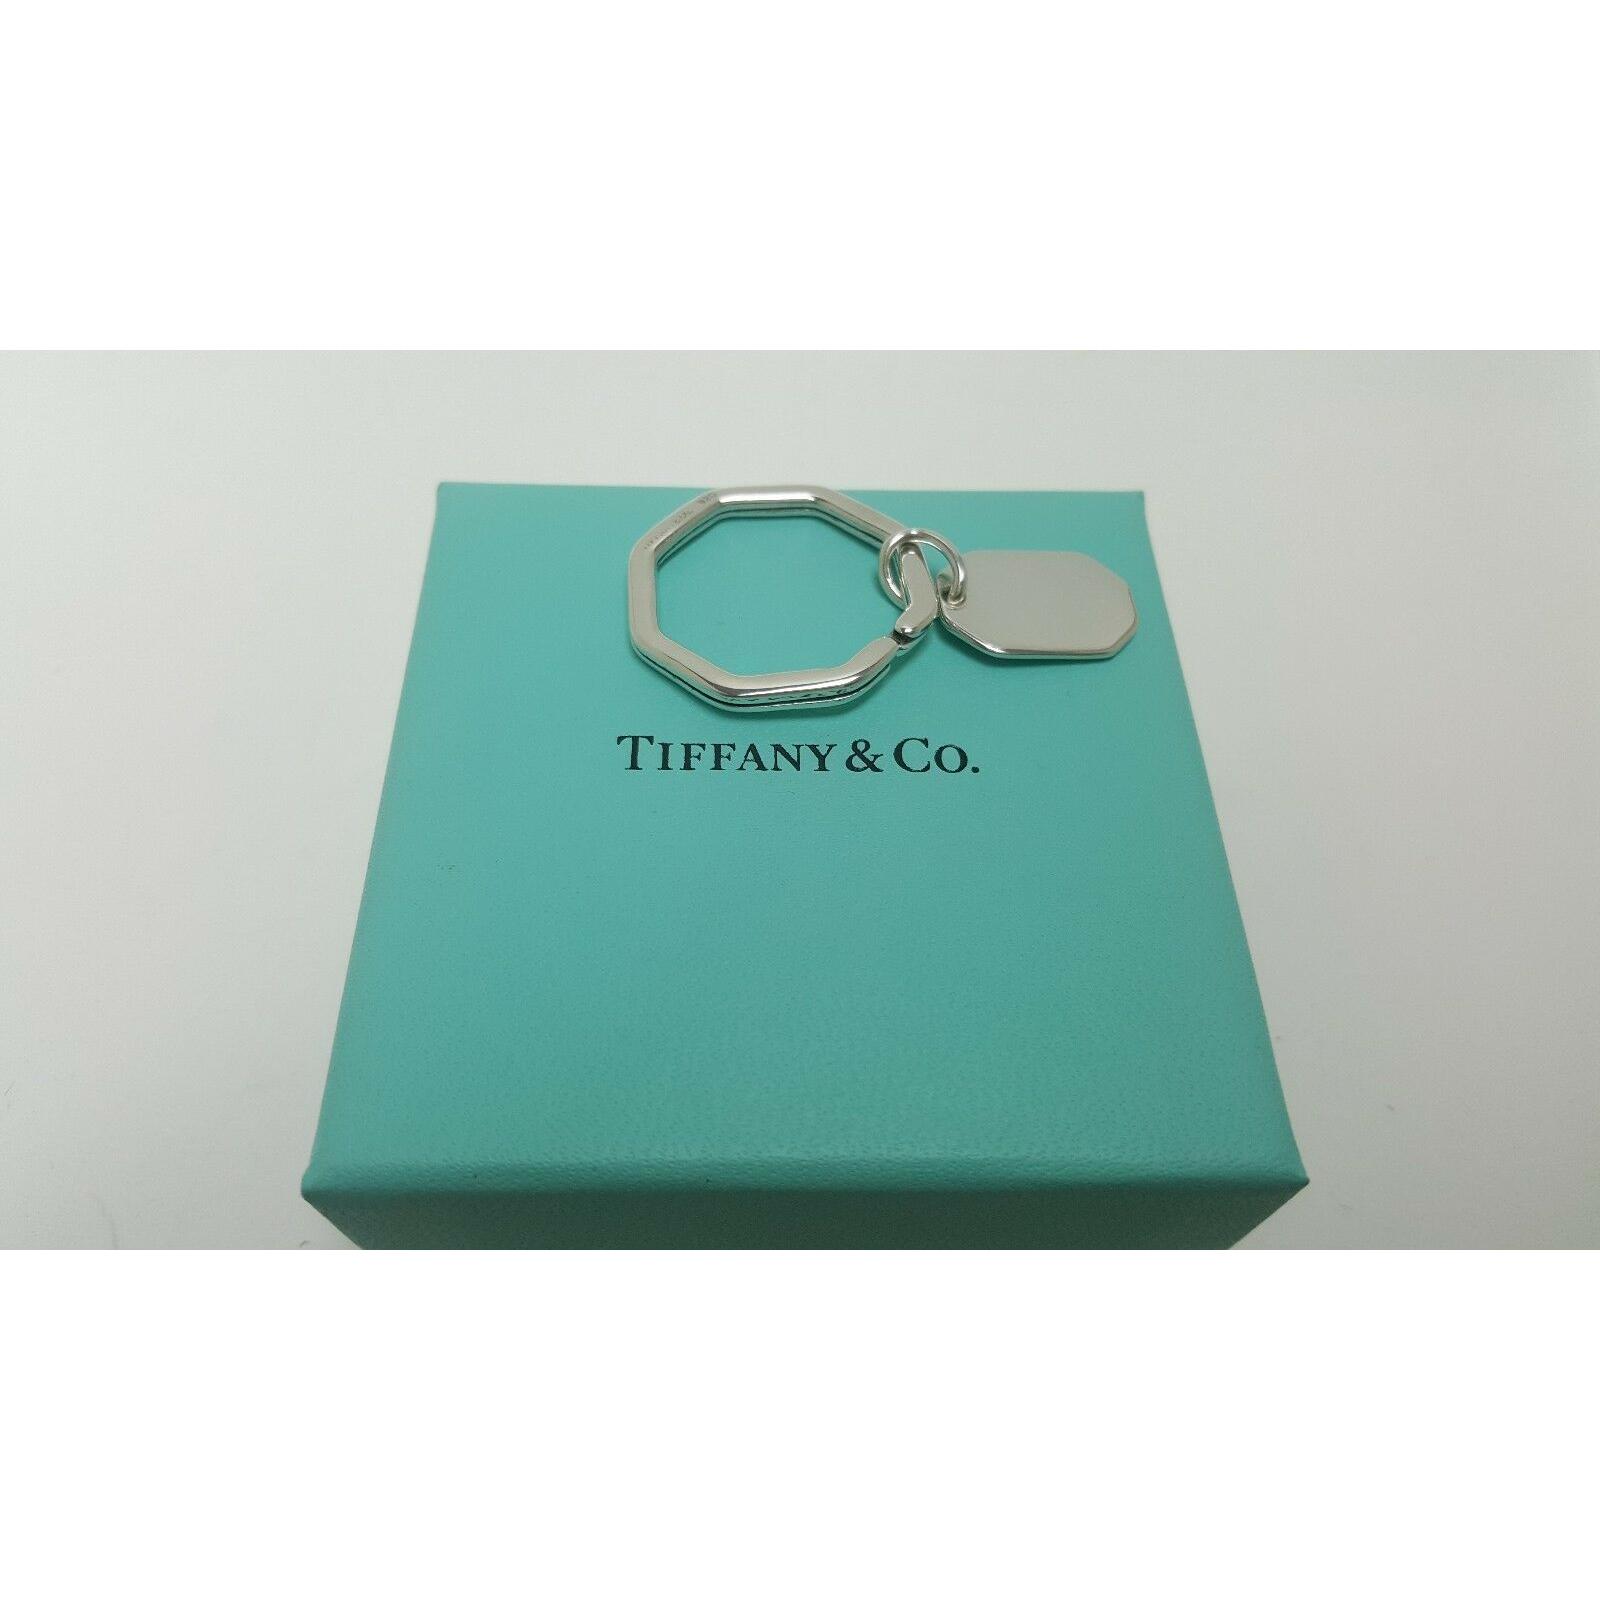 TIFFANY & Co. 925 Sterling Silver Large Key Ring Holder with Pouch. 15.8  GR.